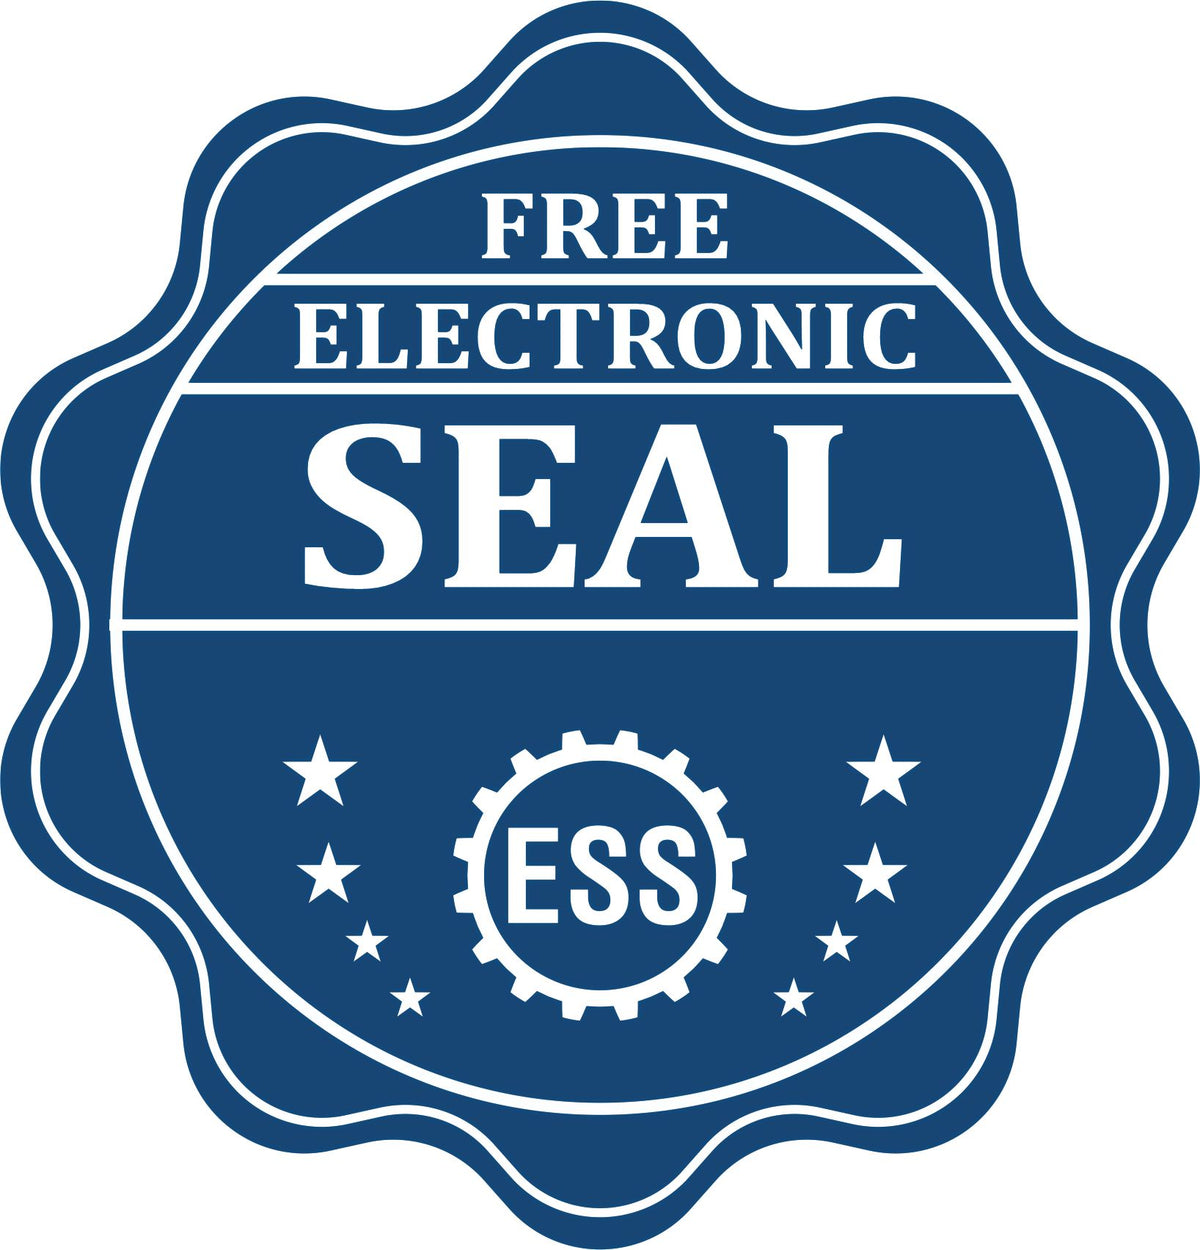 A badge showing a free electronic seal for the Heavy Duty Cast Iron Tennessee Engineer Seal Embosser with stars and the ESS gear on the emblem.